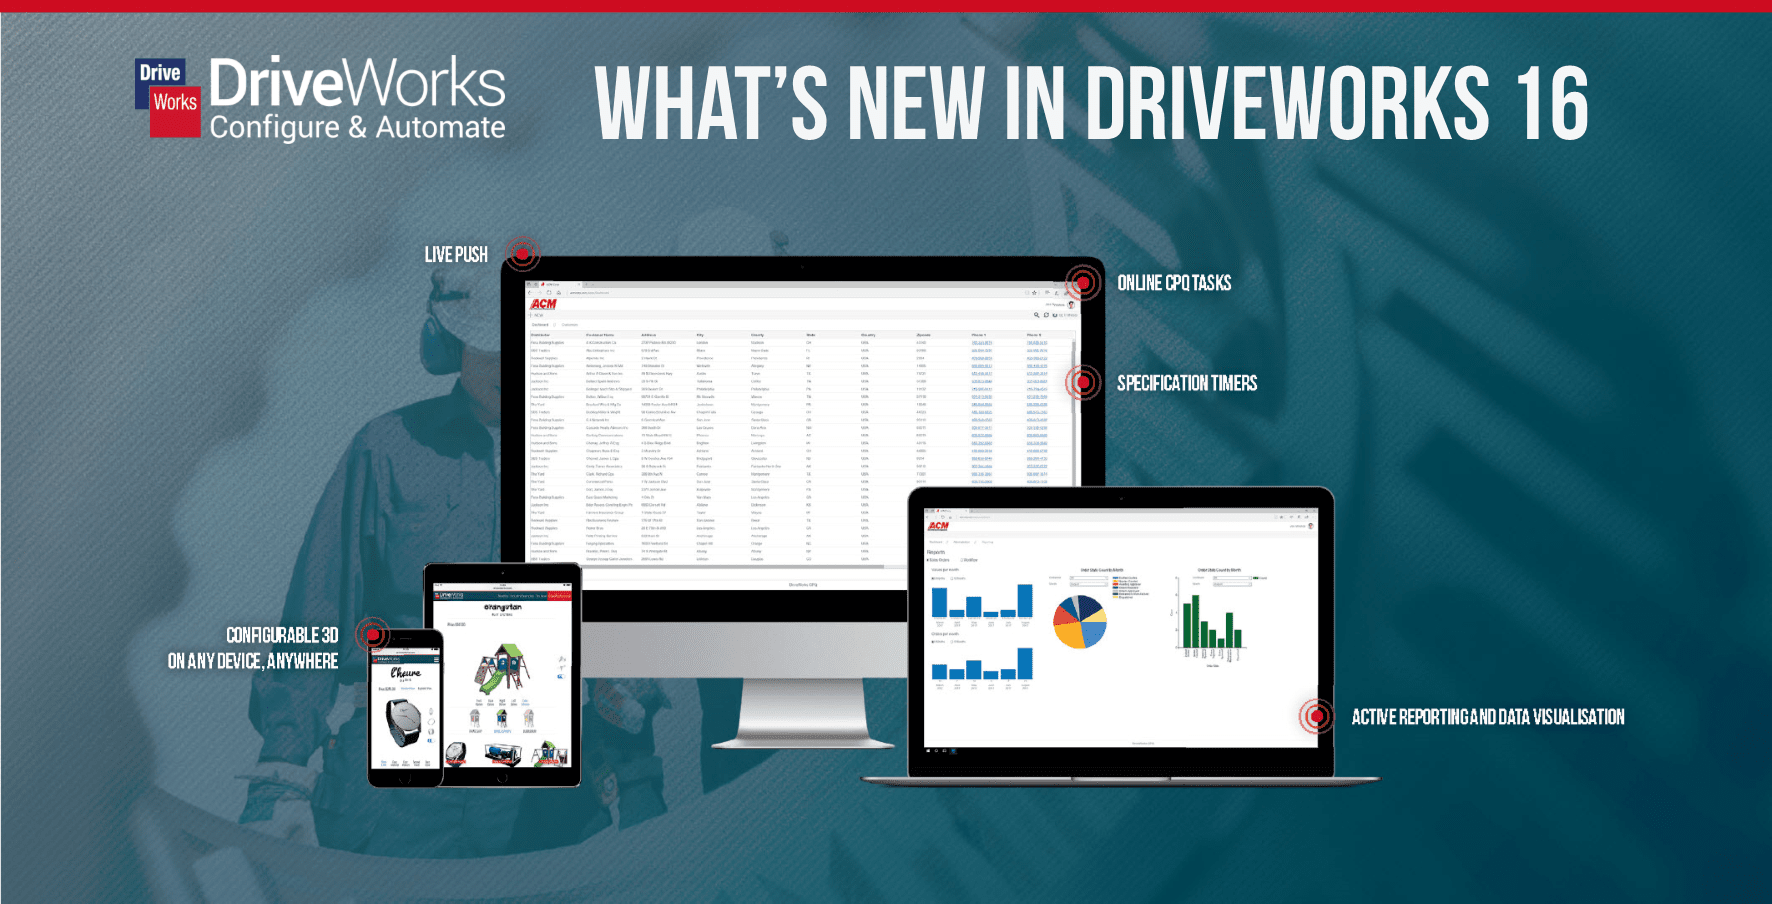 What'sNewinDriveWorks16